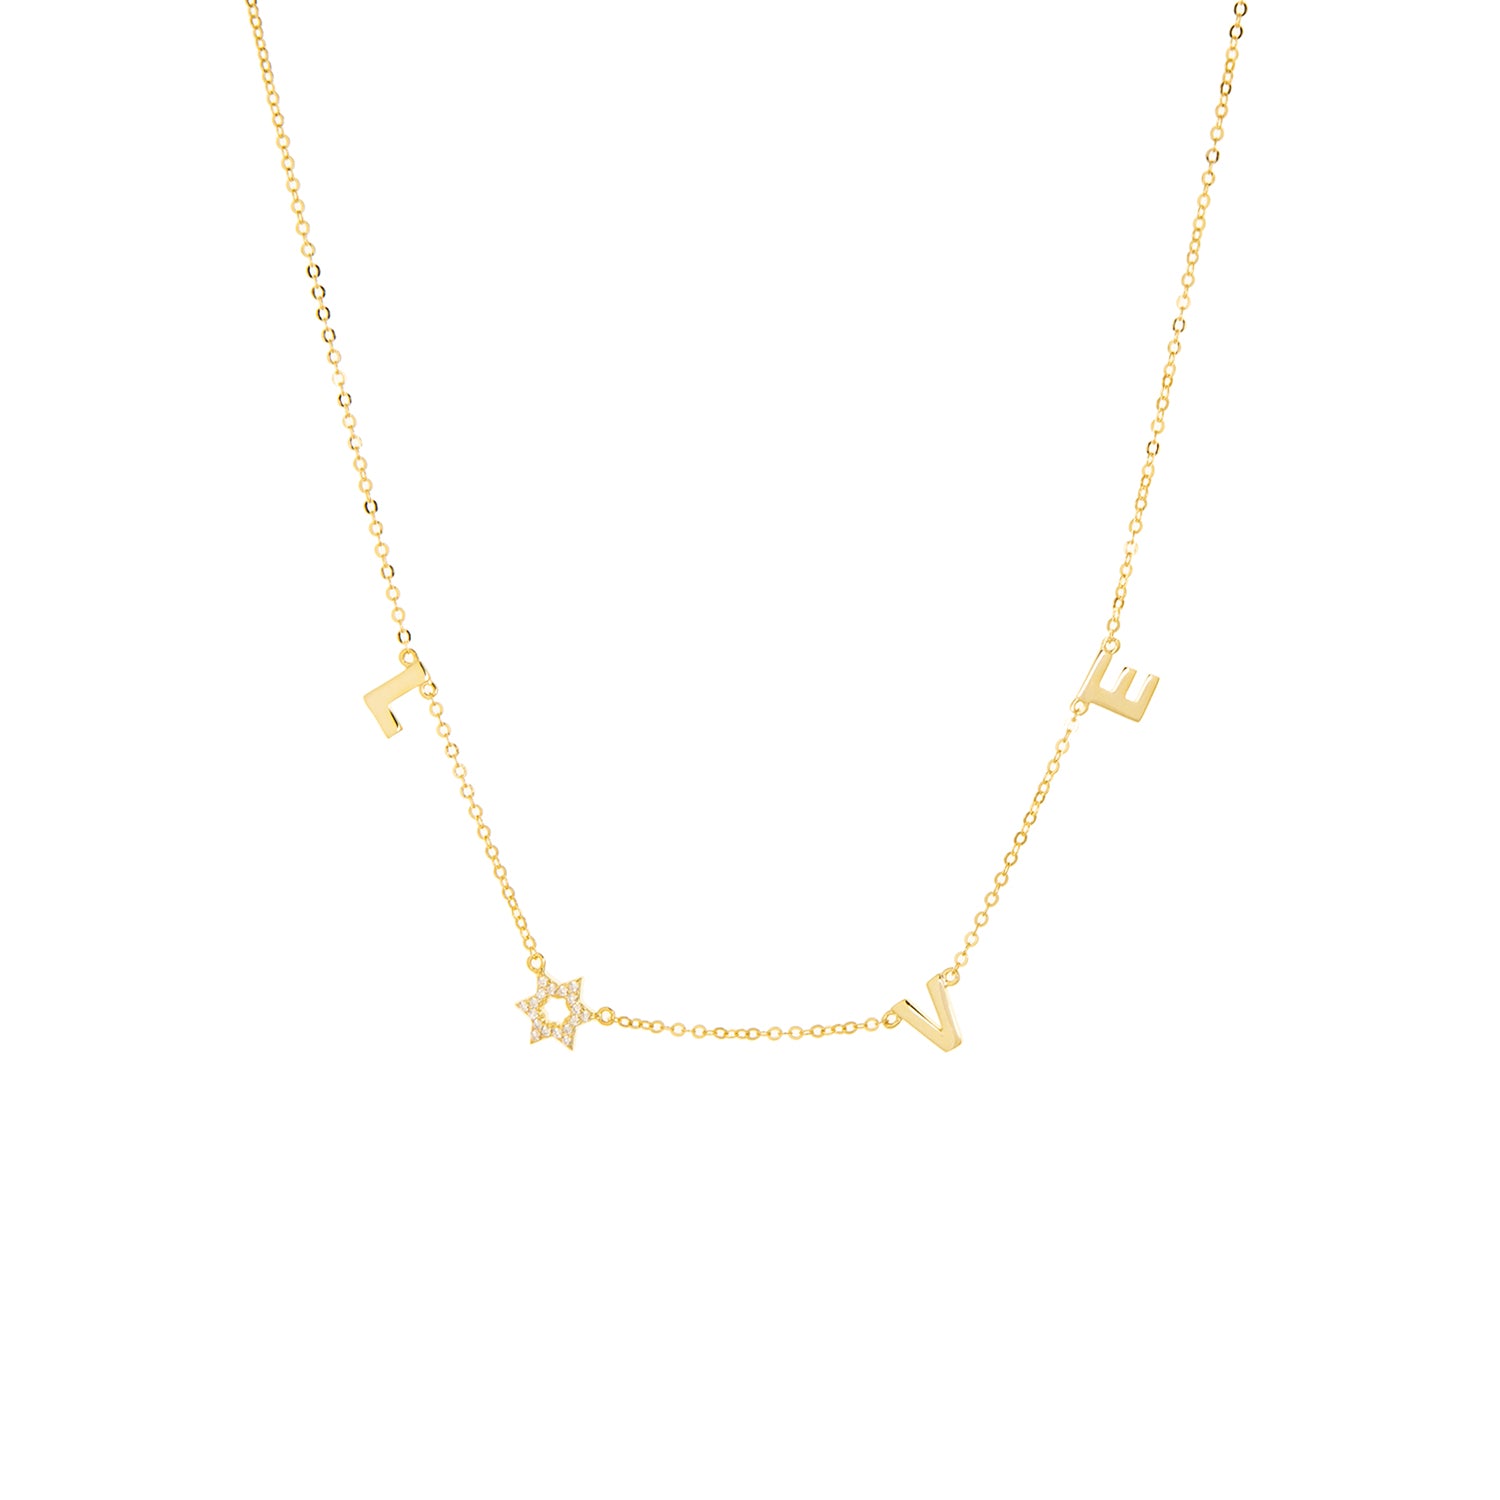 gold plated "LOVE" necklace